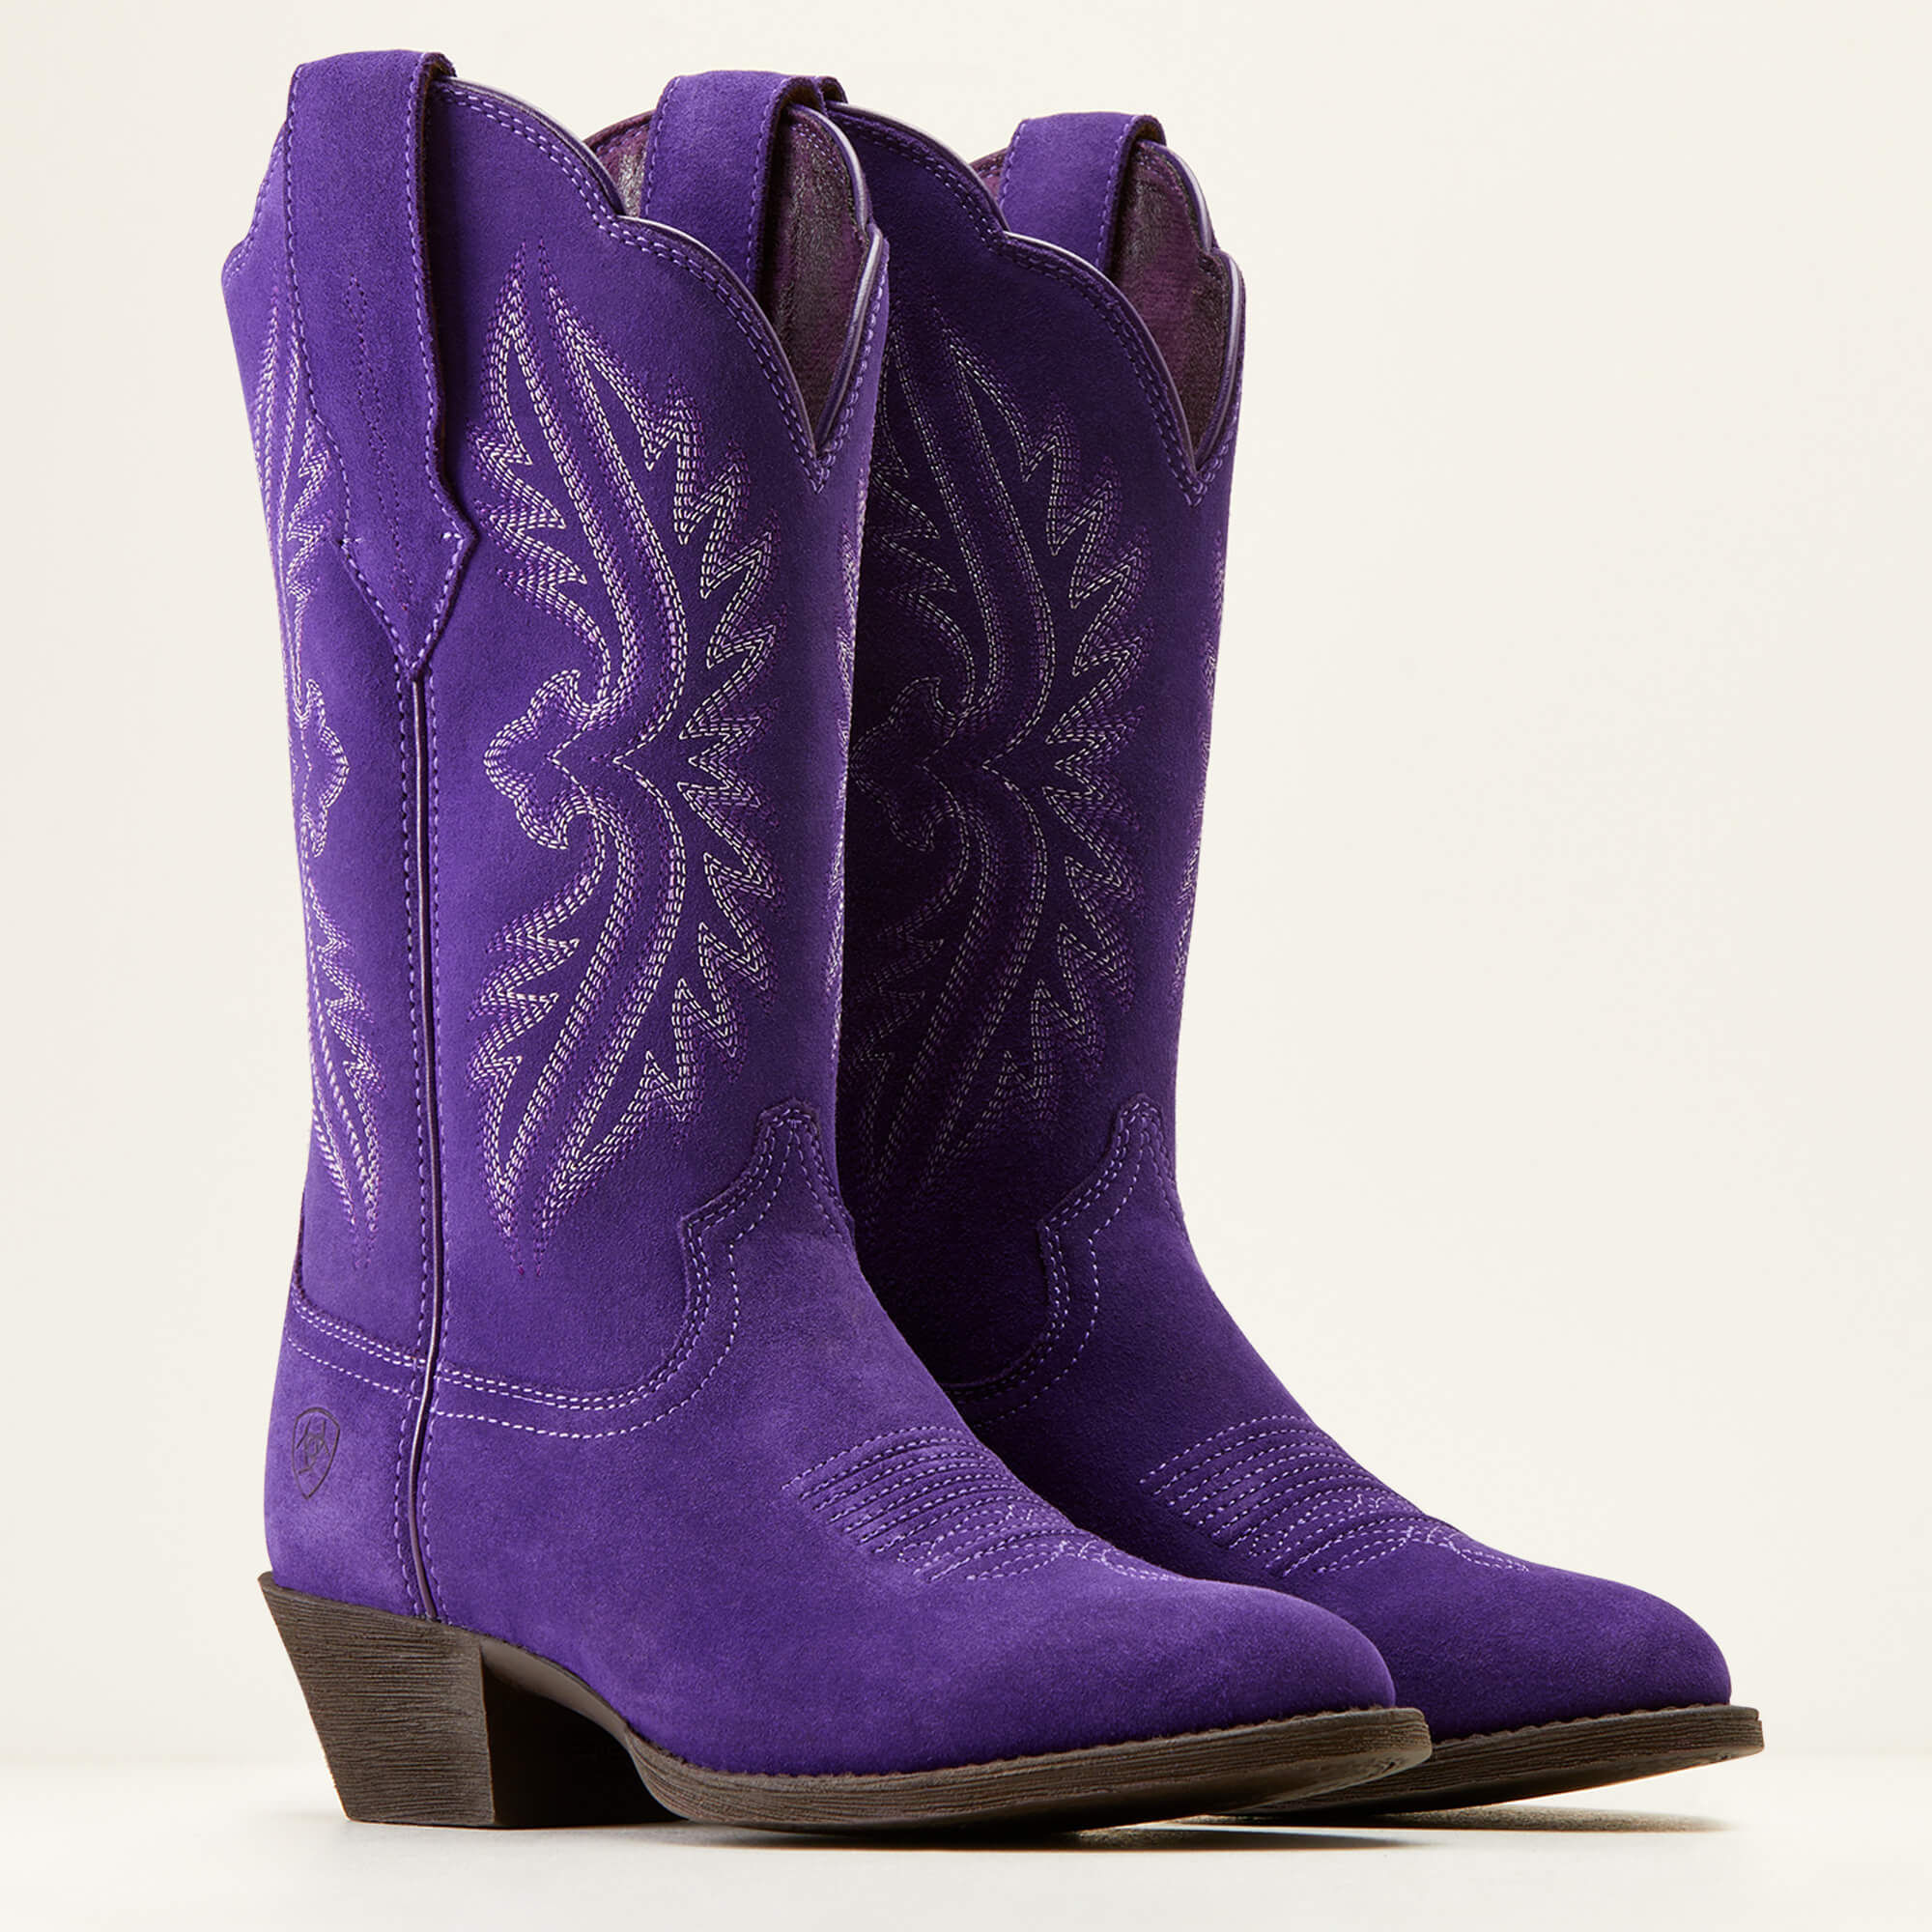 Heritage R Toe StretchFit Western Boot | Ariat